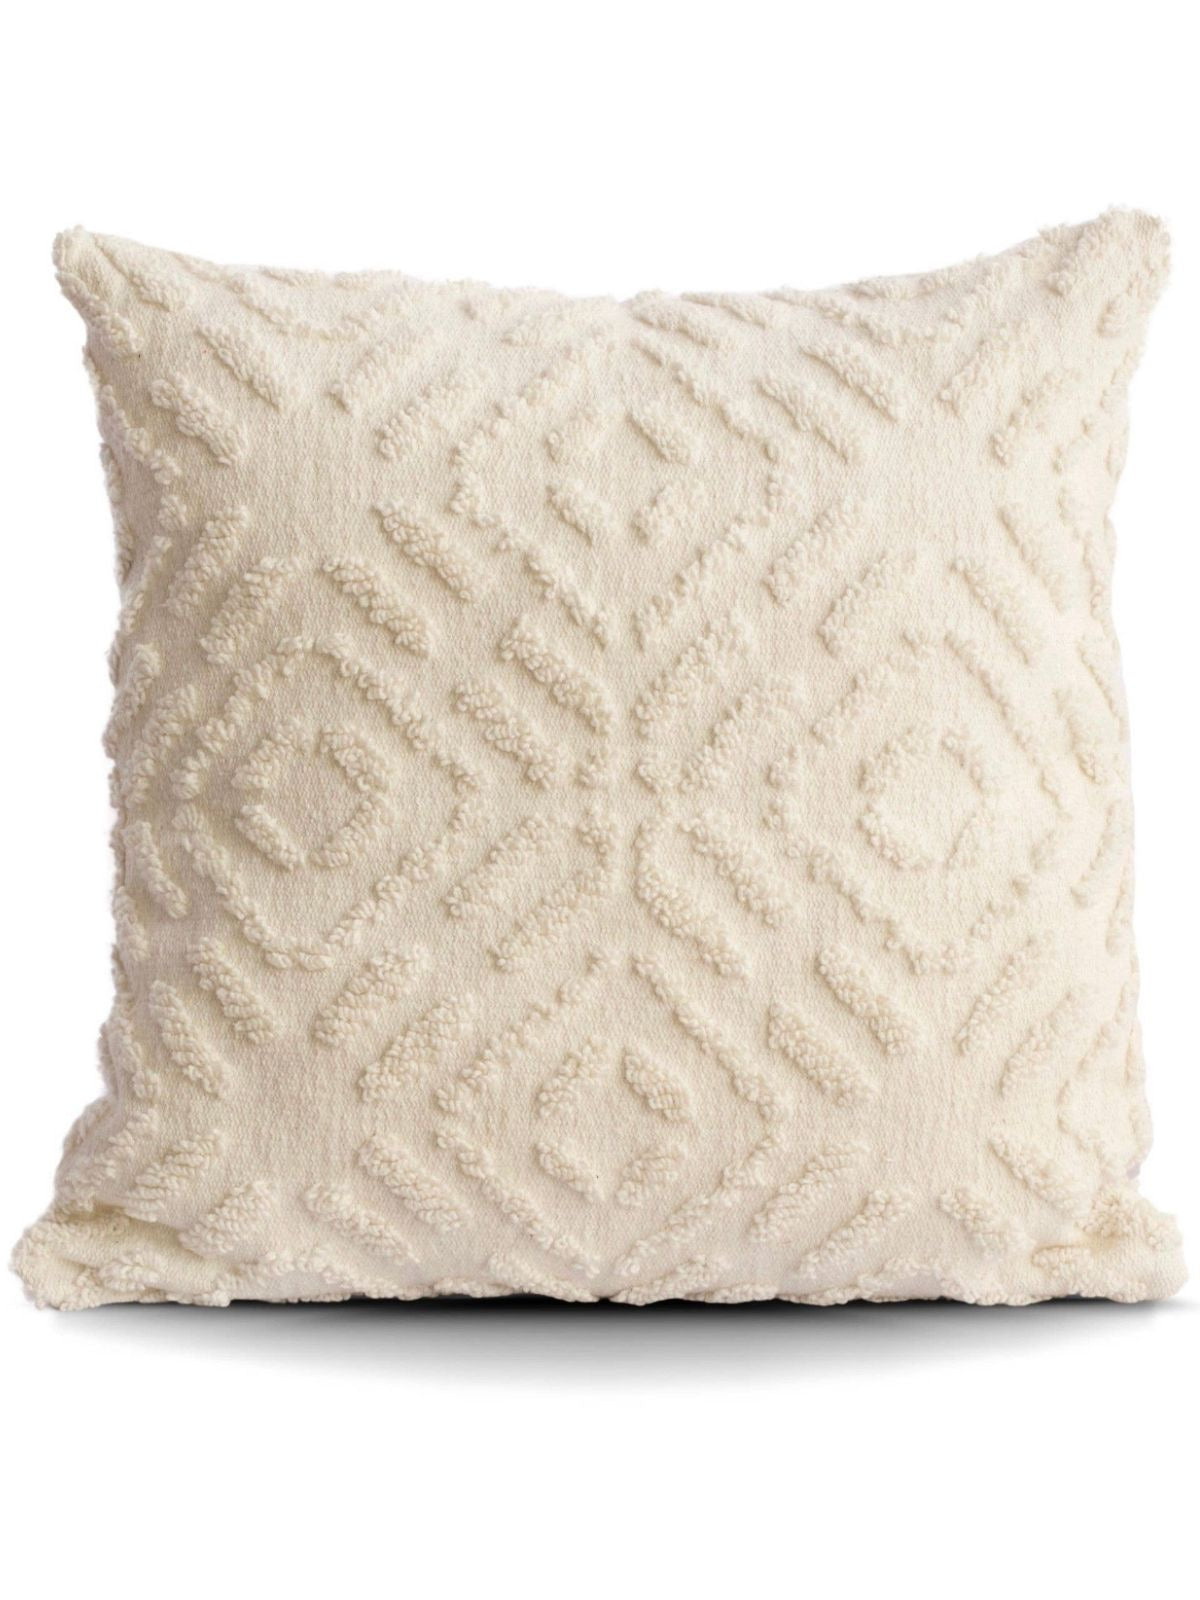 This 100% Cotton Maze Tufted 18x18 decorative pillow has a timeless design inspired by the ancient mystery of mazes with oh-so-soft texture and patterning. Sold by KYA Home Decor